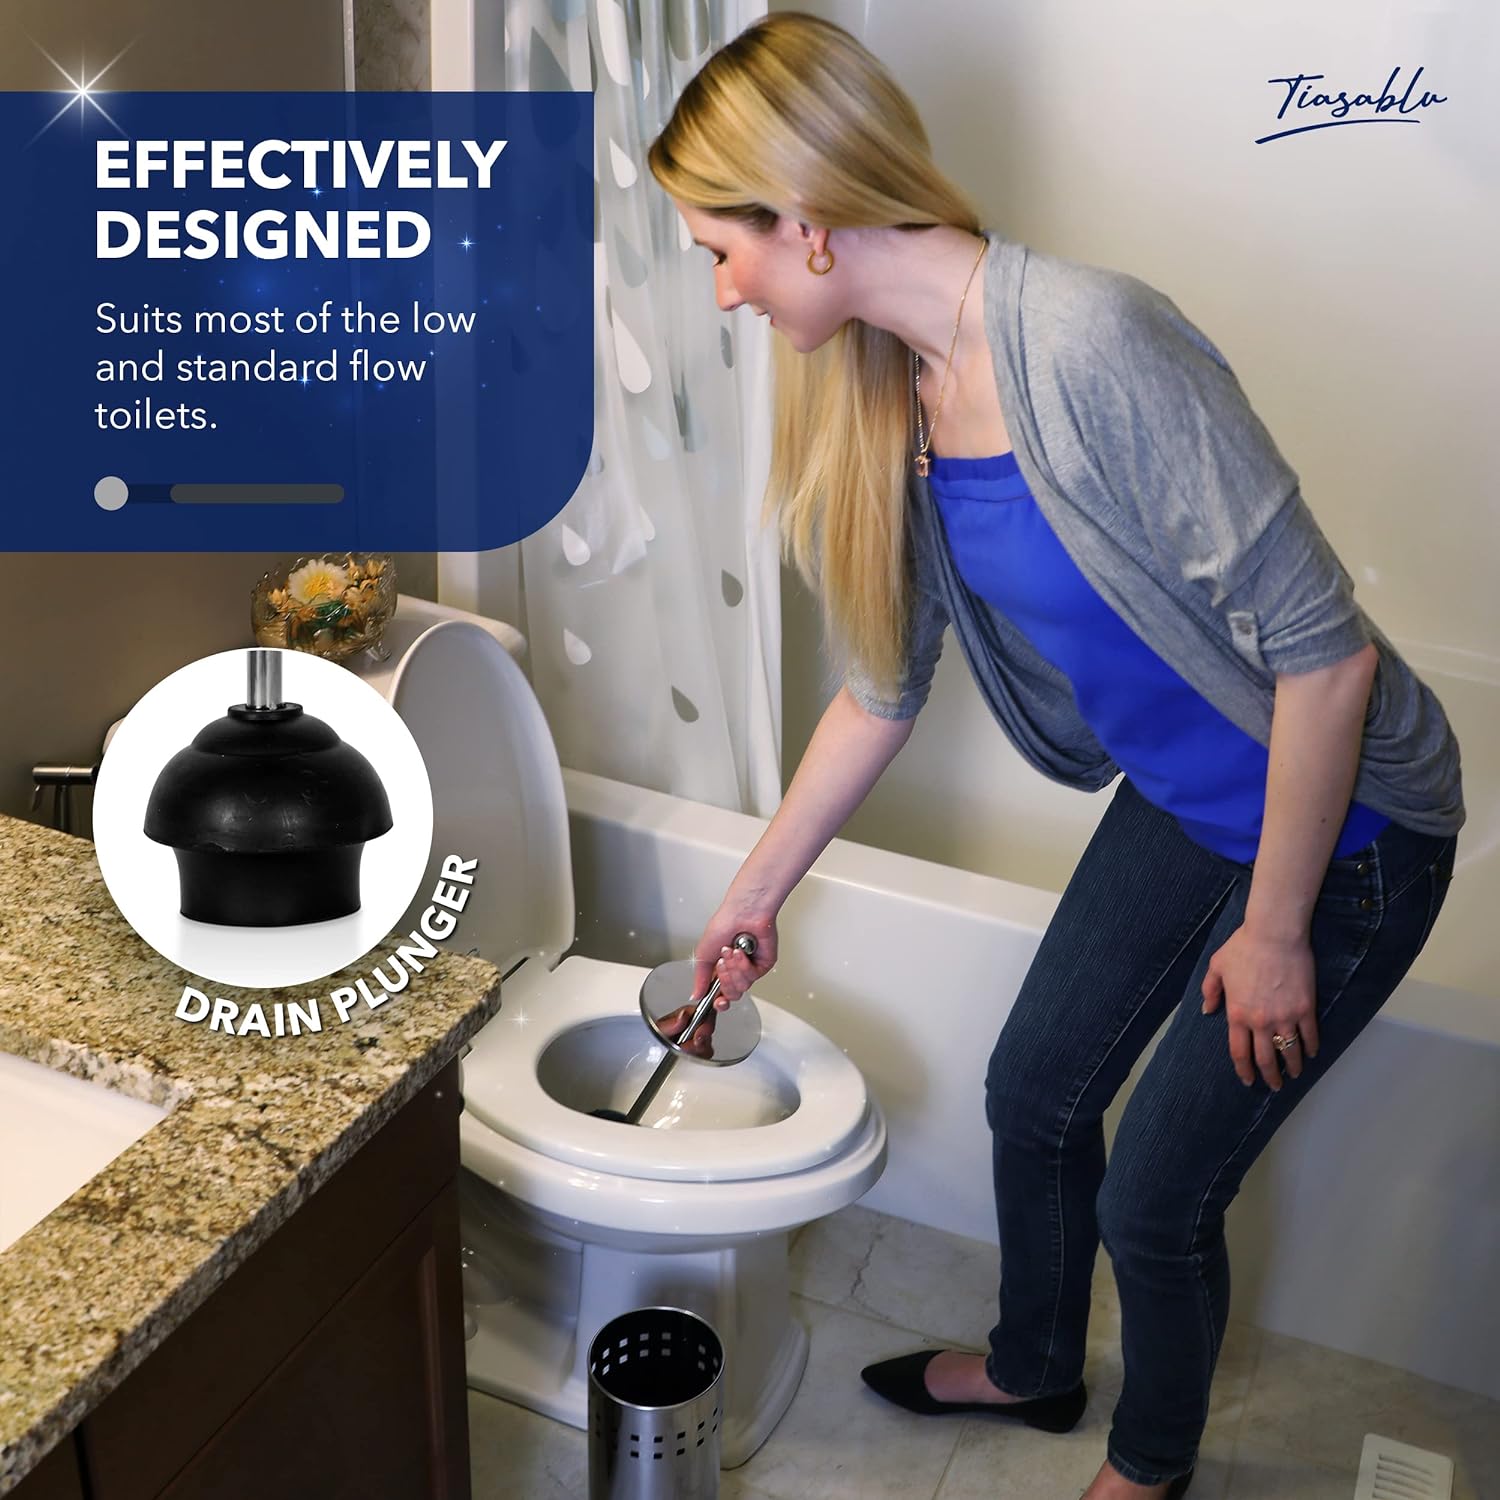 Tiasablu Plunger with Concealed Holder - Heavy Duty Plunger for Toilet, Plungers for Bathroom, No Splash Back, Long Handle - Discreet To